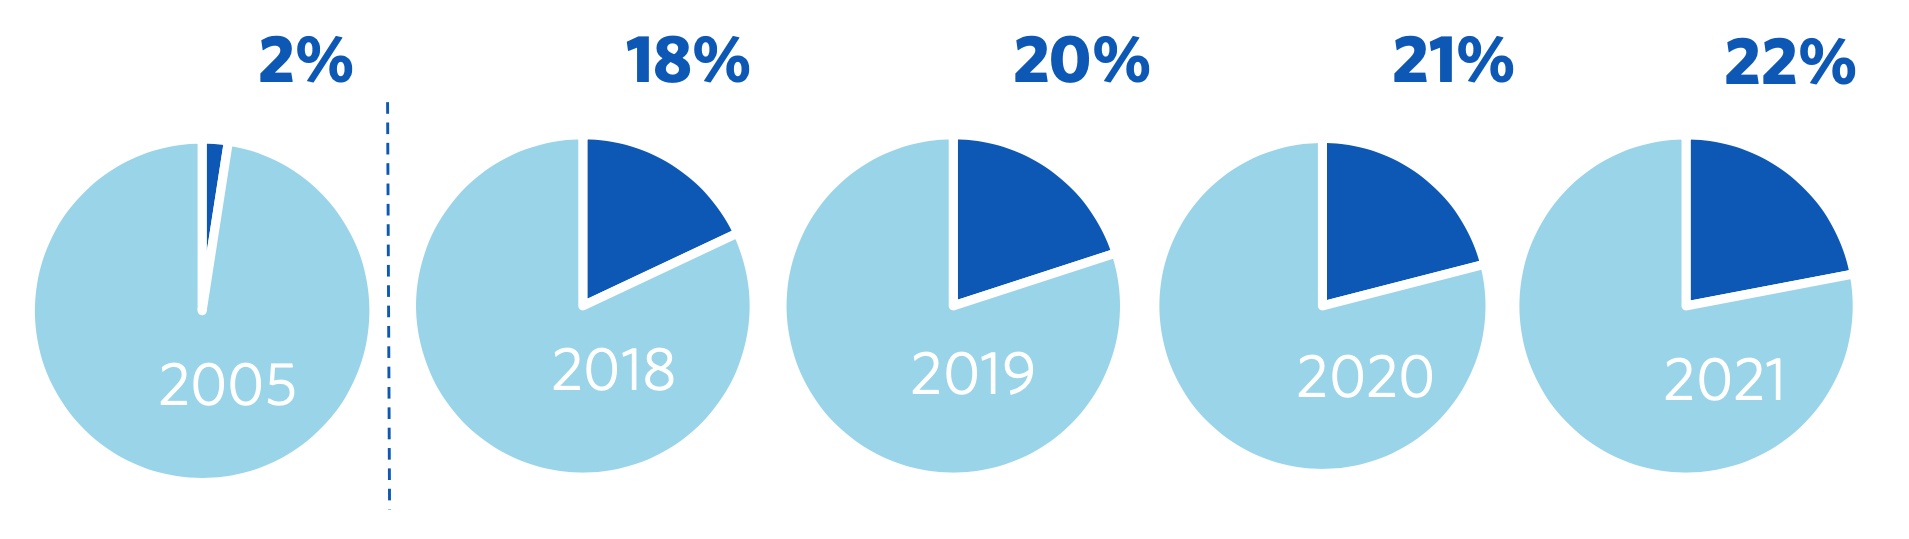 Pie graphs showing the percentage of international % of overall student headcount over the years. 2005 - 2%; 2018 - 18%; 2019 - 20%; 2020 - 21%; 2021 - 22%